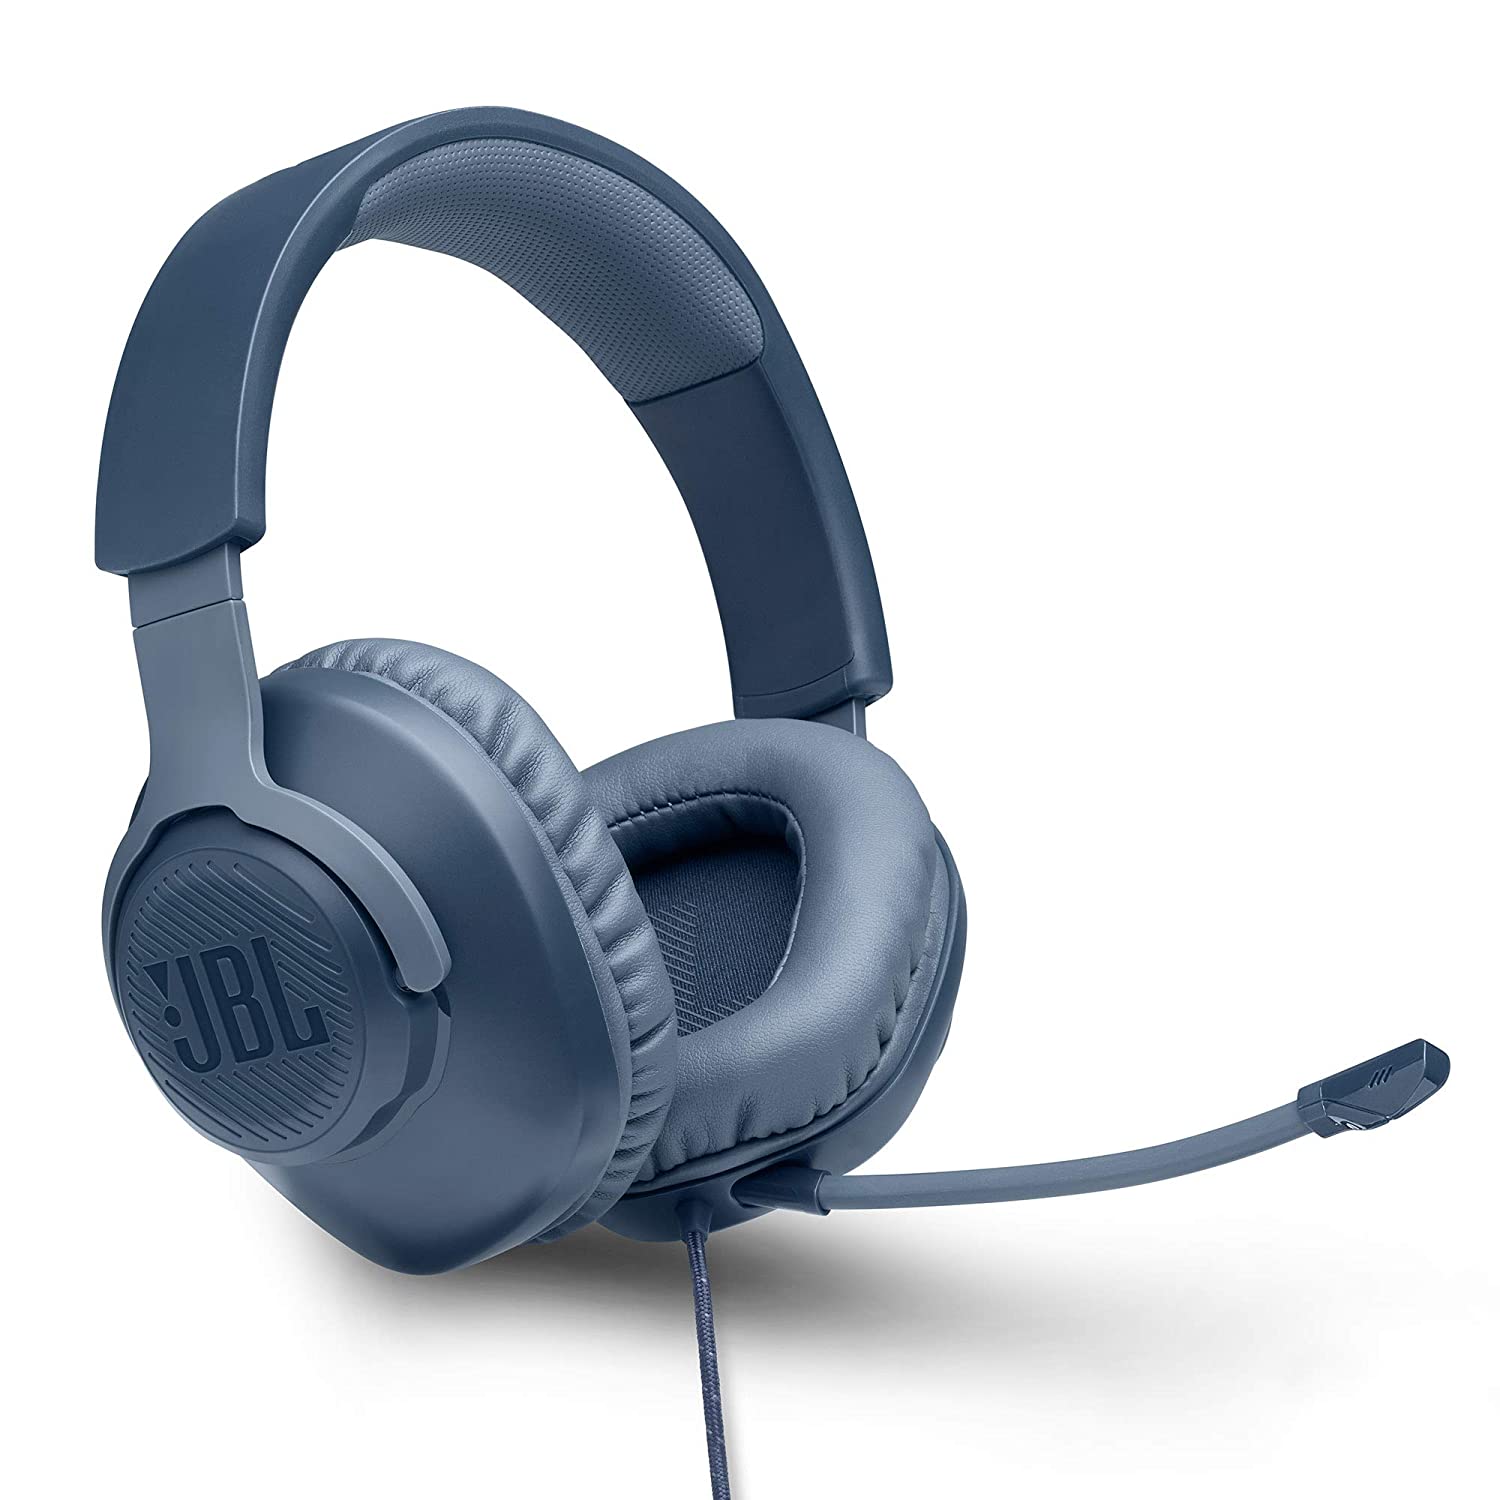 JBL-Quantum 100-Wired Over-Ear Gaming Headset with Detachable Mic for PC, Mobile, Laptop, PS4, Xbox, Nintendo Switch, VR